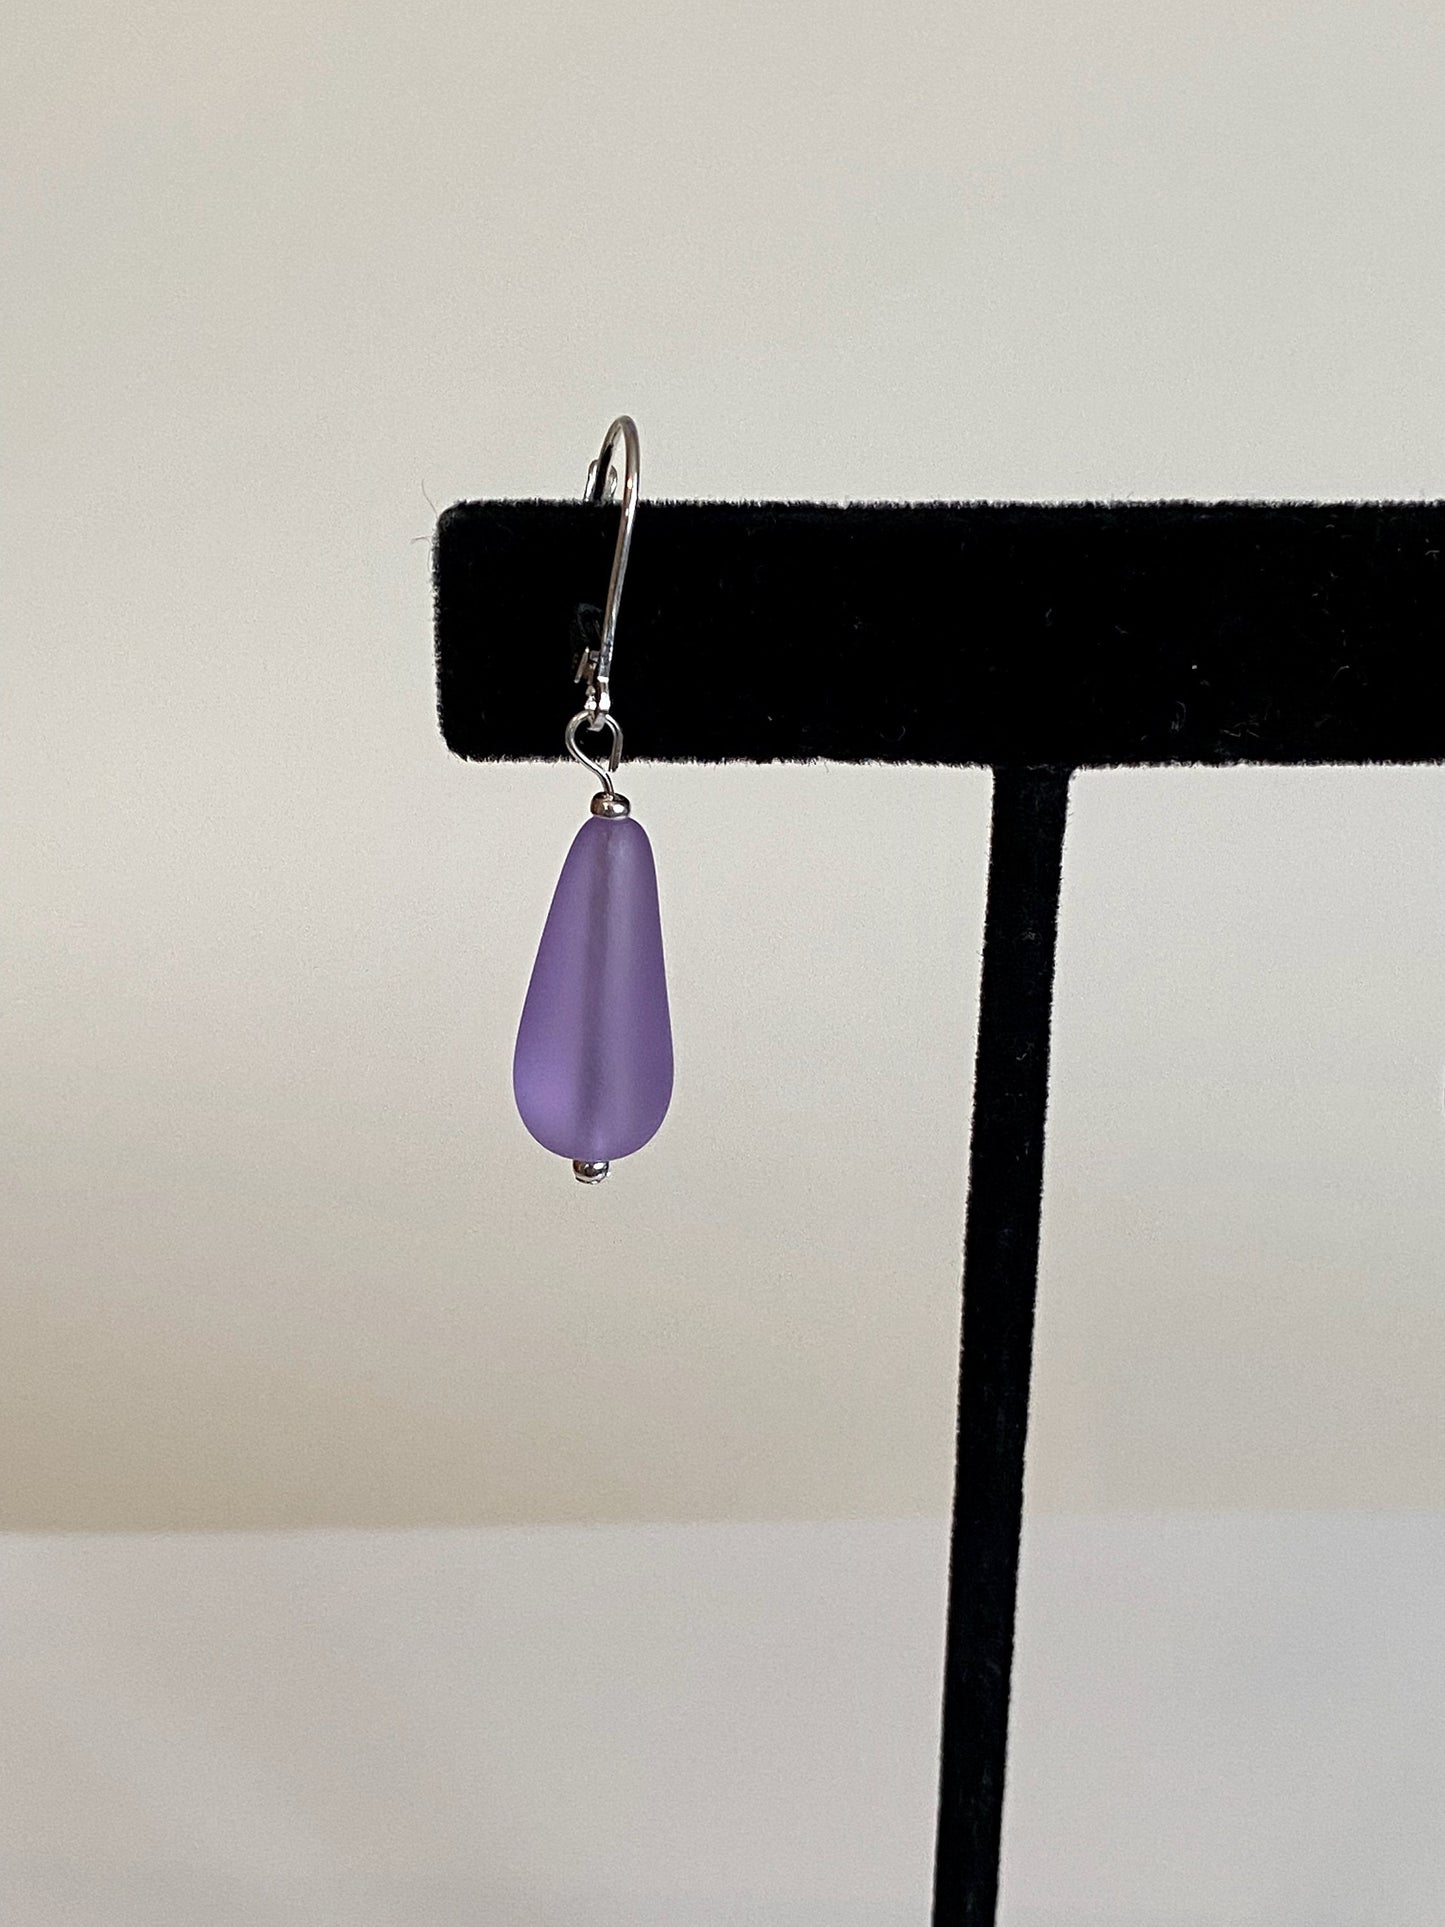 Soft sea glass type frosted purple teardrop earrings. Fashioned with a quality sterling silver lever back clasp.